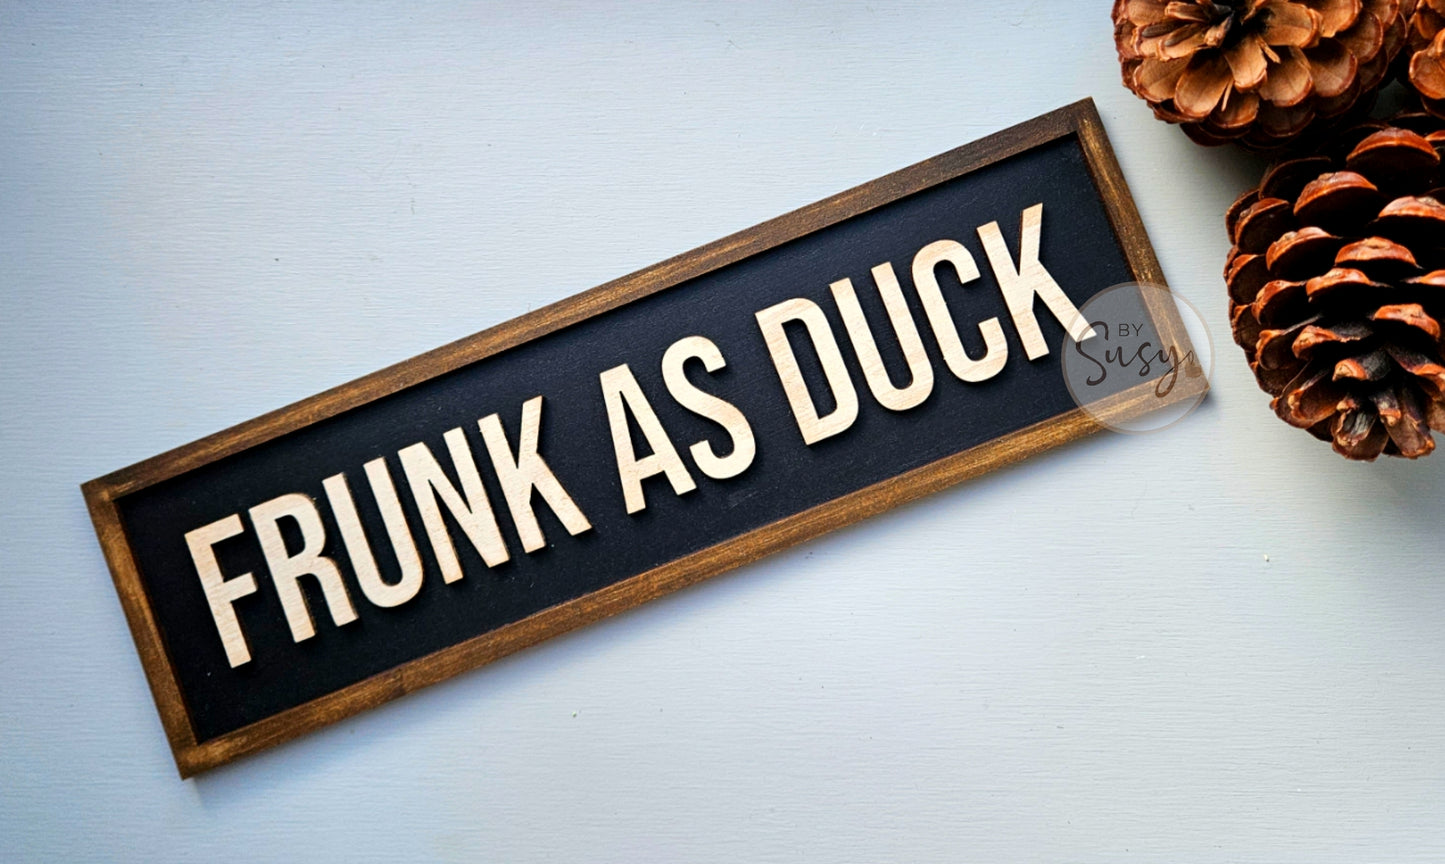 Frunk As Duck Layered Rustic Style Sign